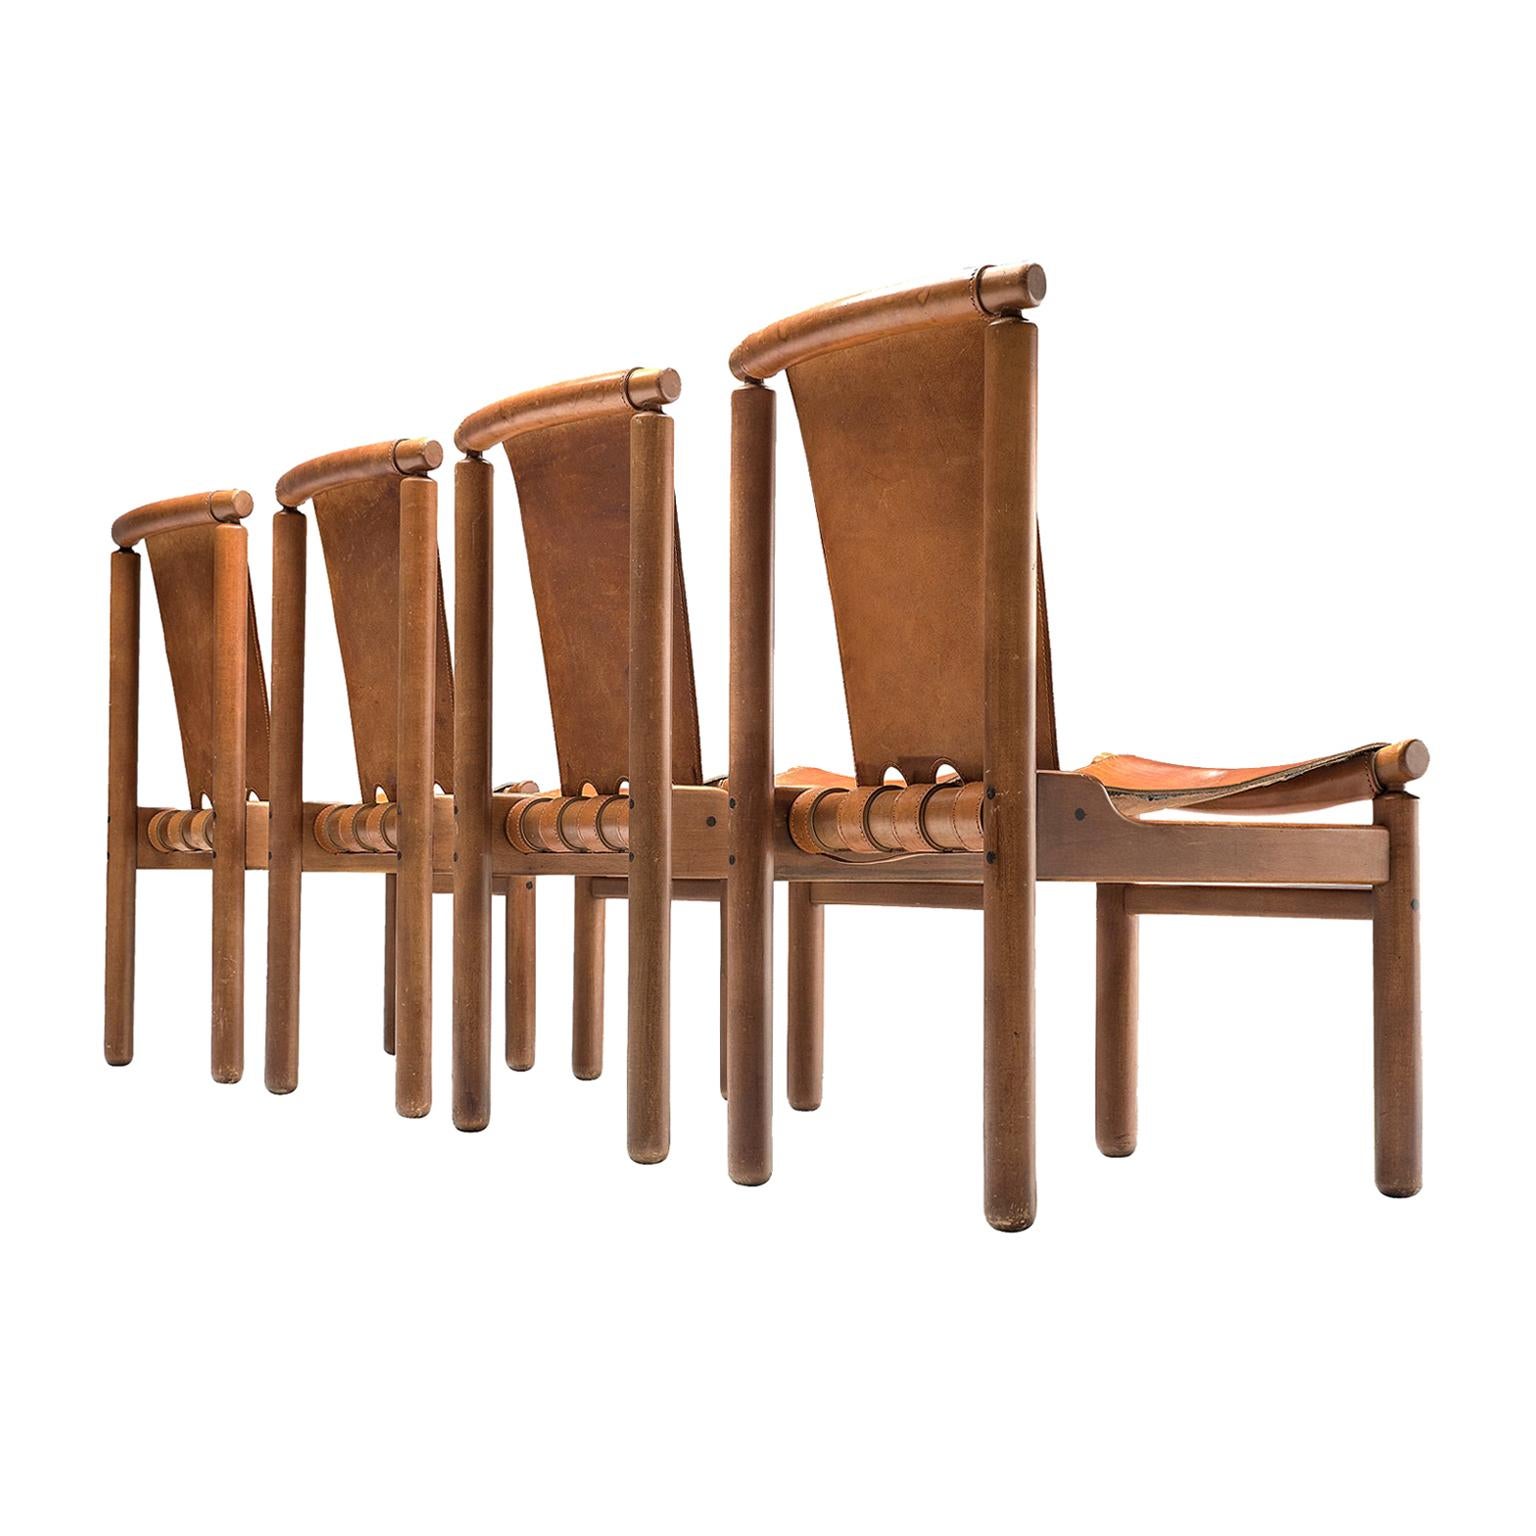 Set of Four Finnish Dining Chairs in Patinated Cognac Leather